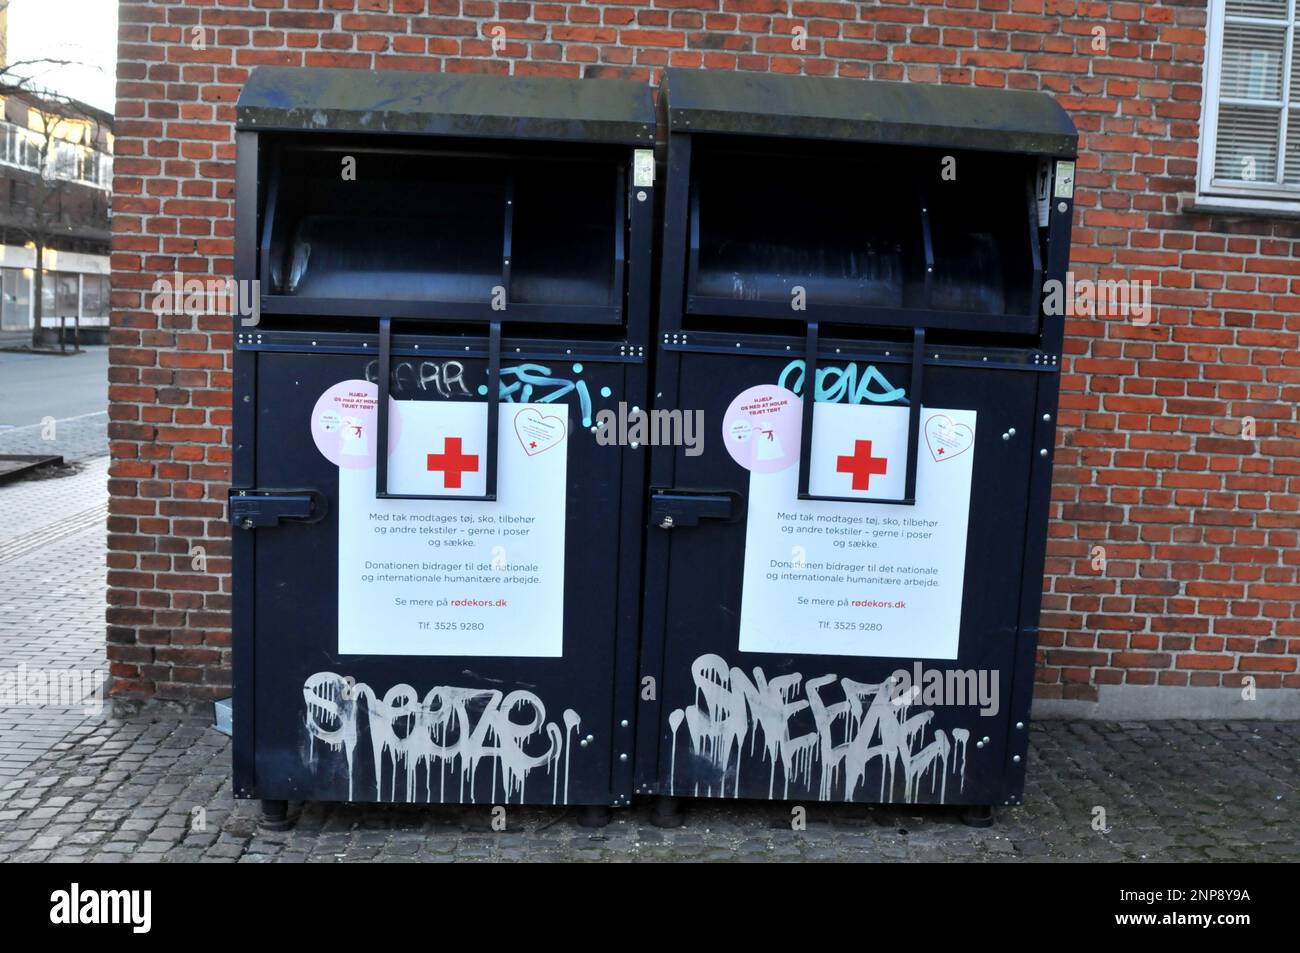 Red cross chairty container stock and images - Alamy